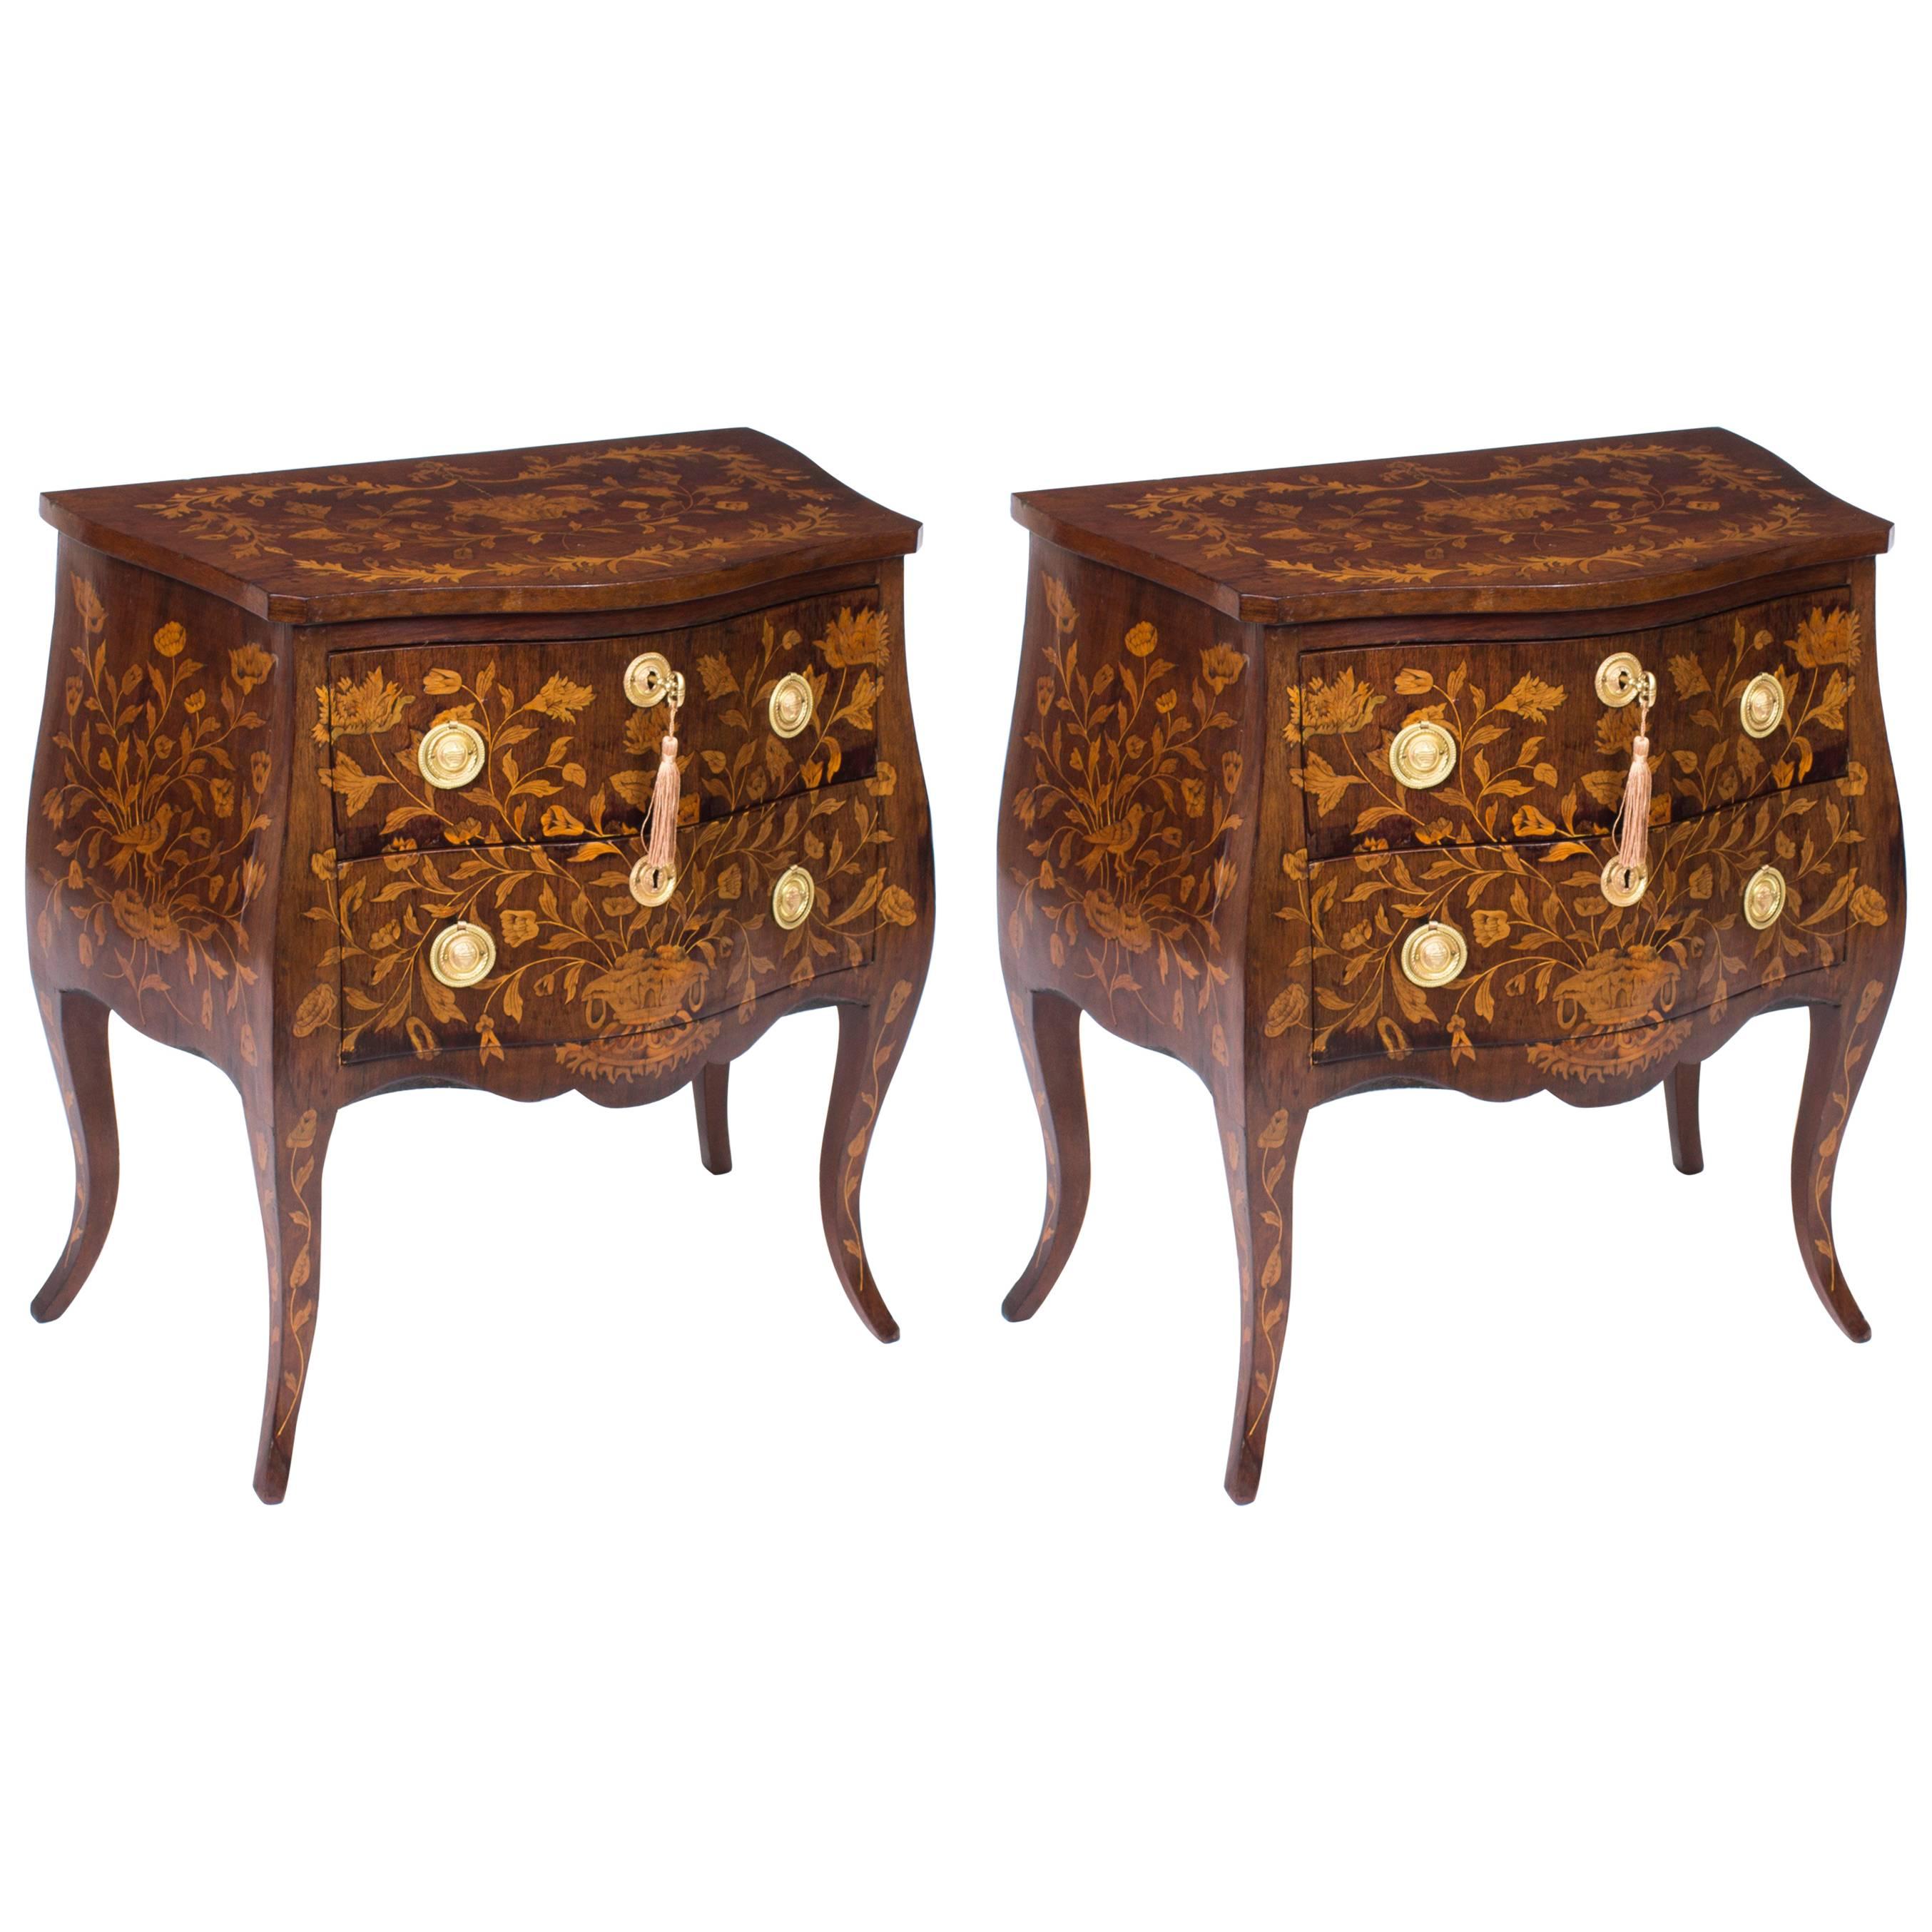 18th Century Pair of Dutch Marquetry Walnut Bedside Chests